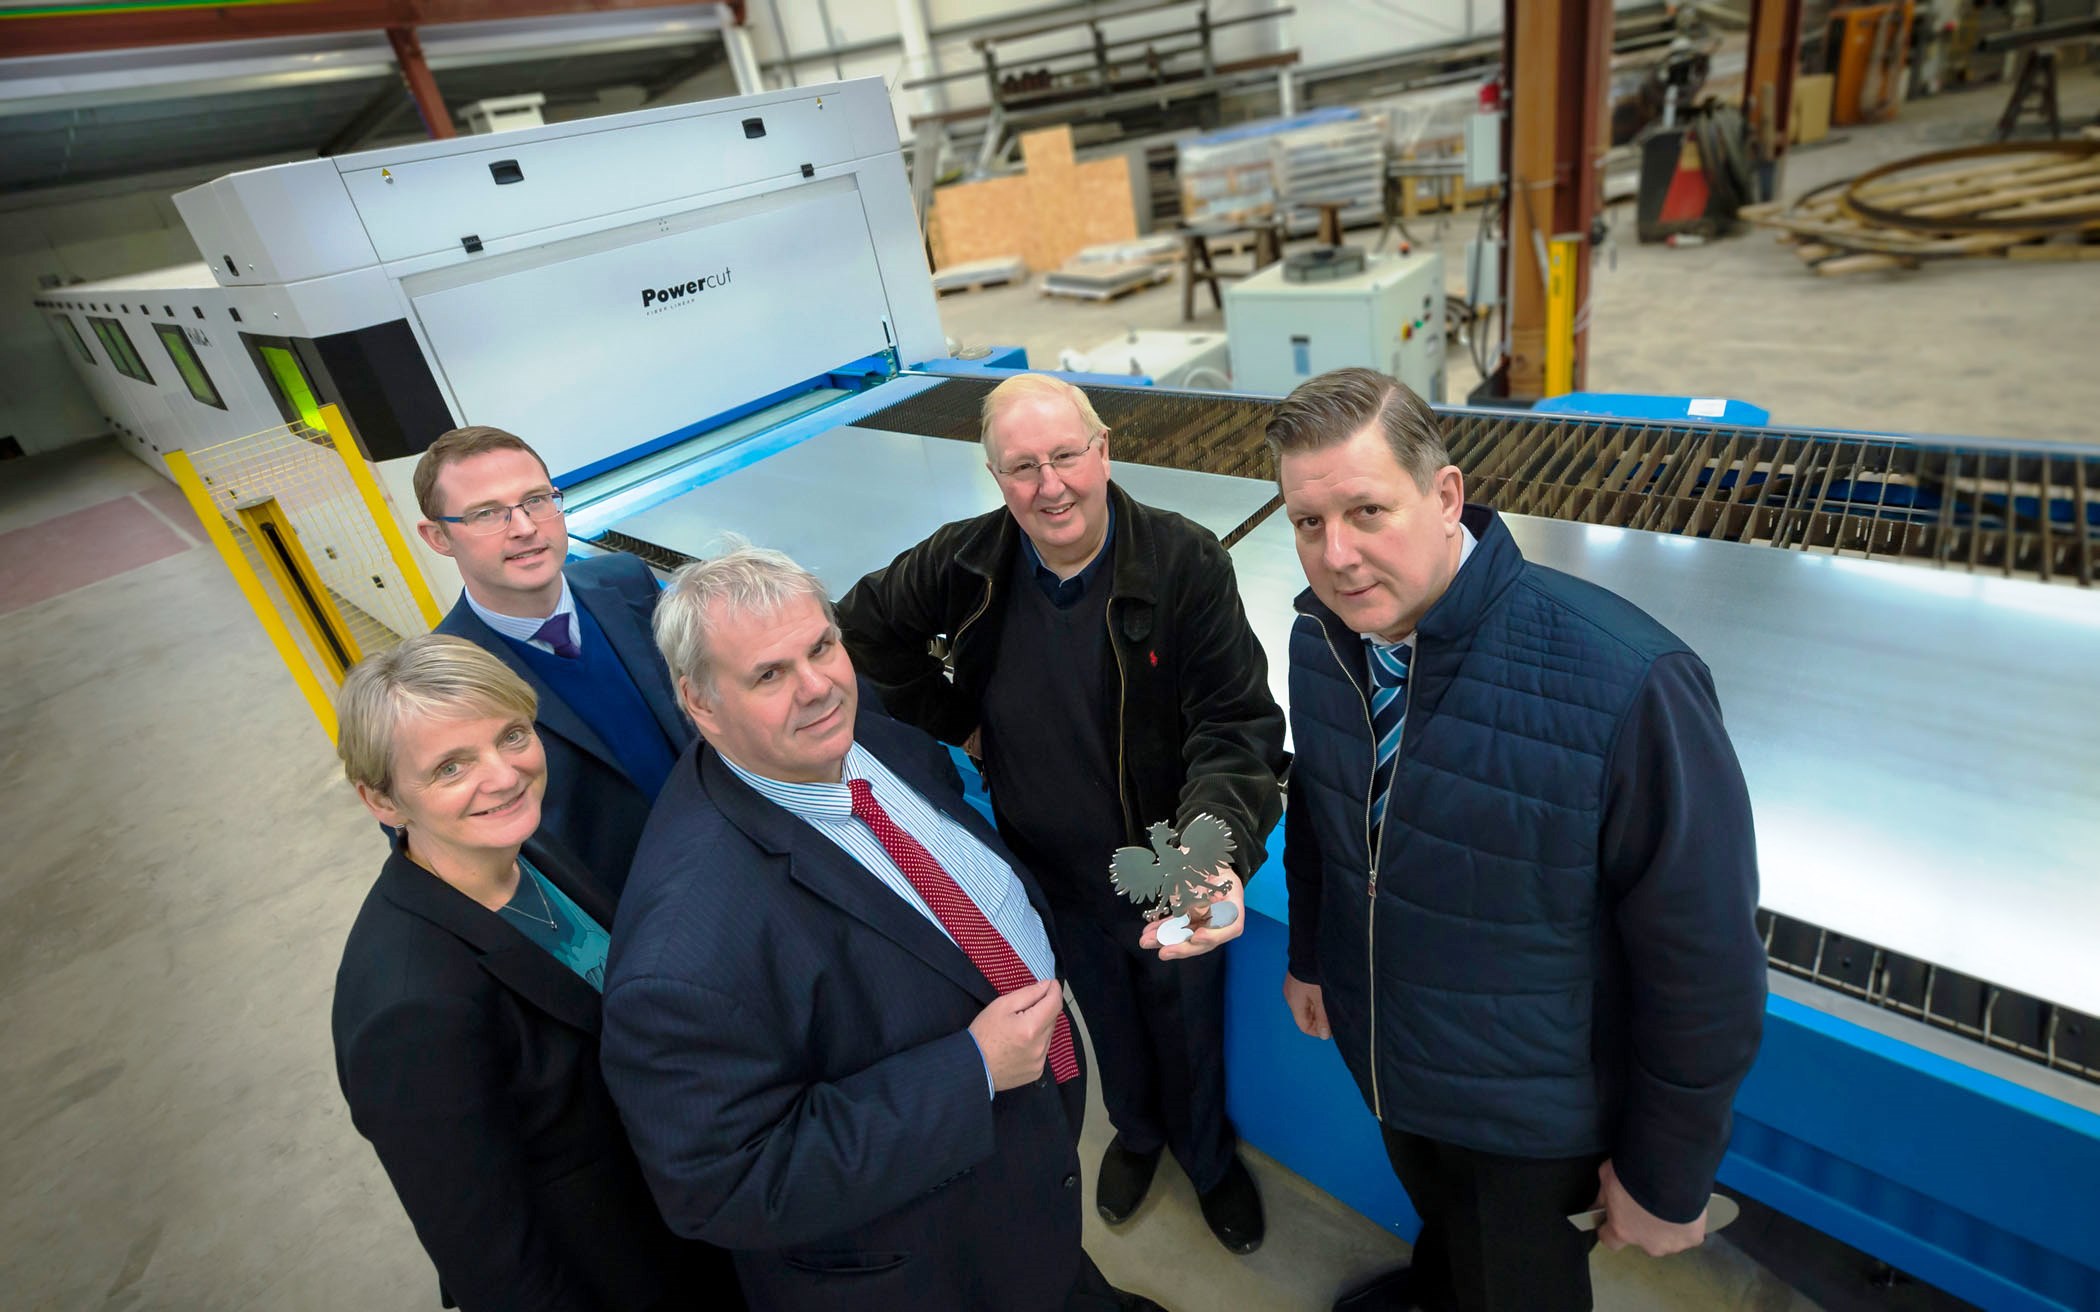 Image: Cutting edge: metal cutting company booming following council grant